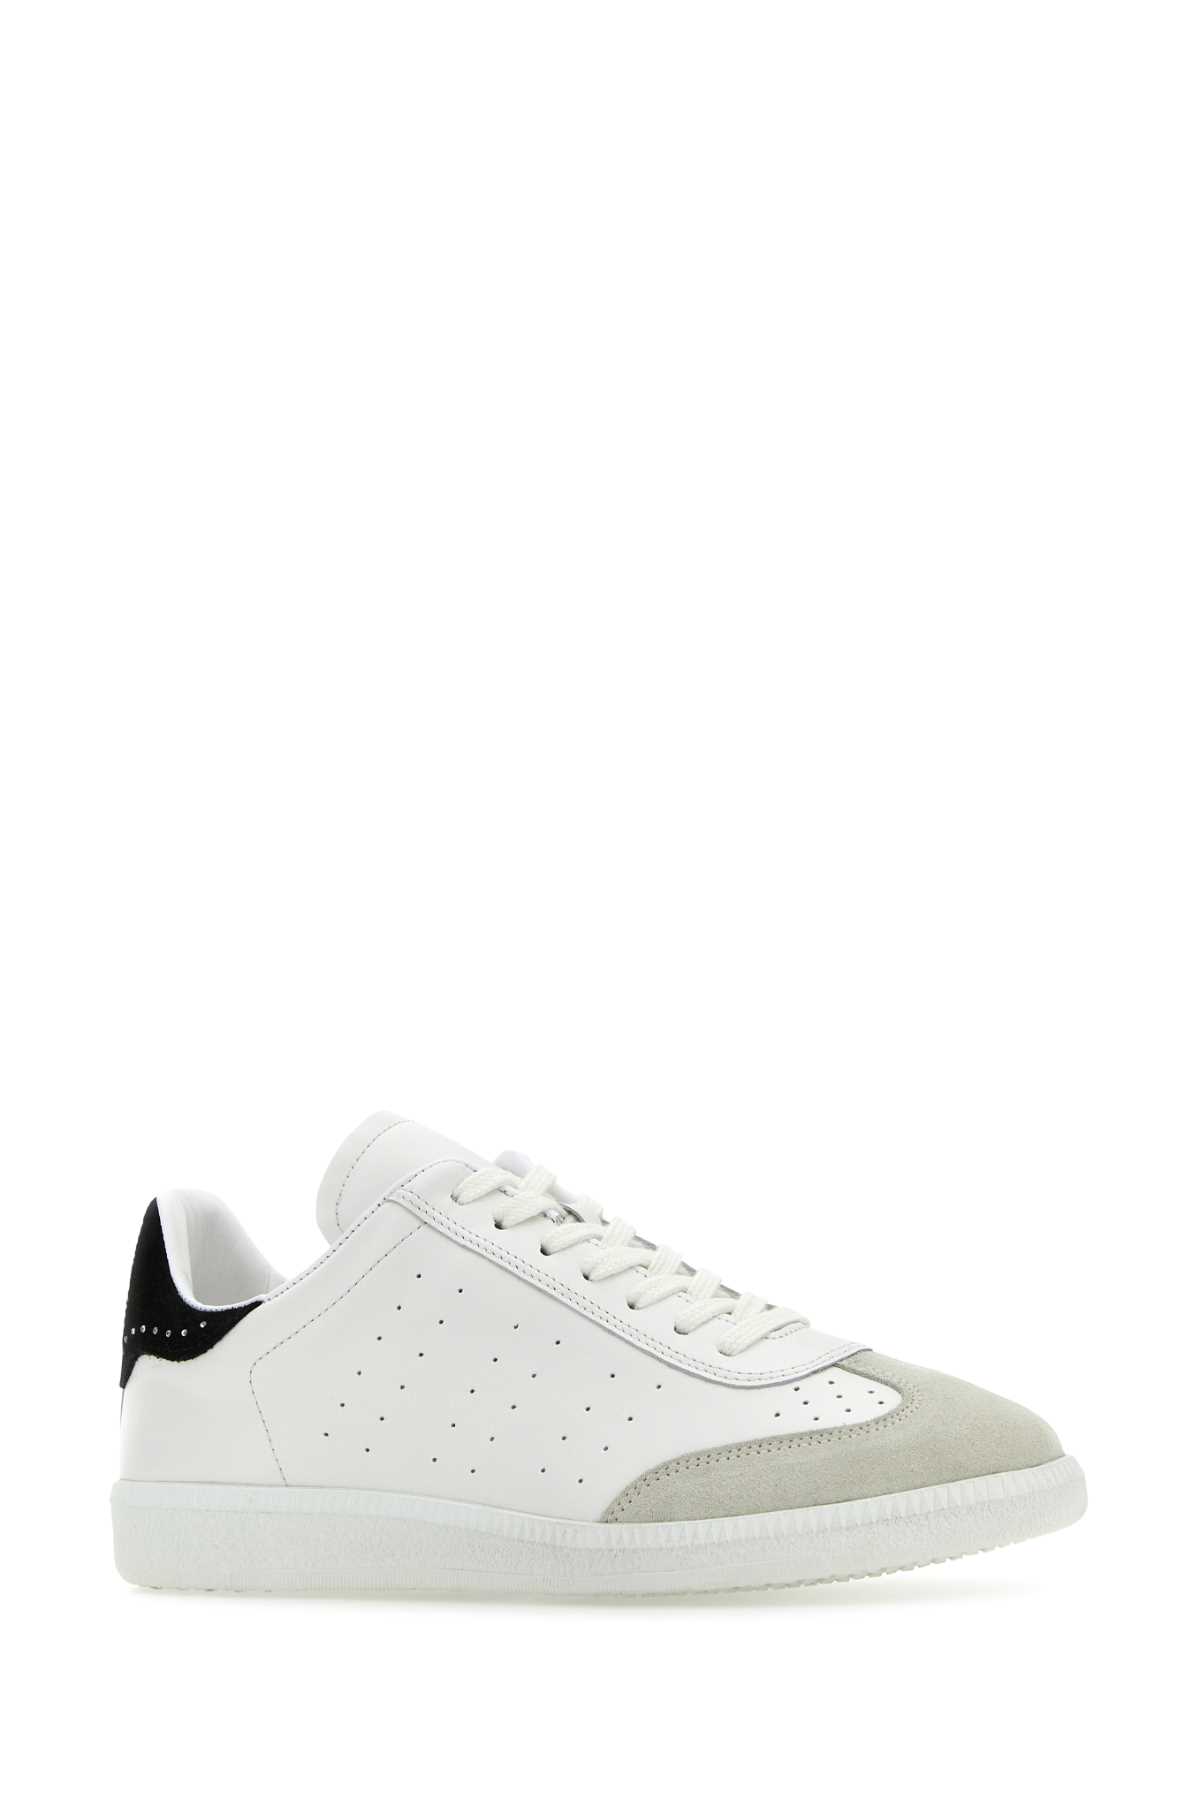 ISABEL MARANT MULTICOLOR LEATHER BRYCE SNEAKERS